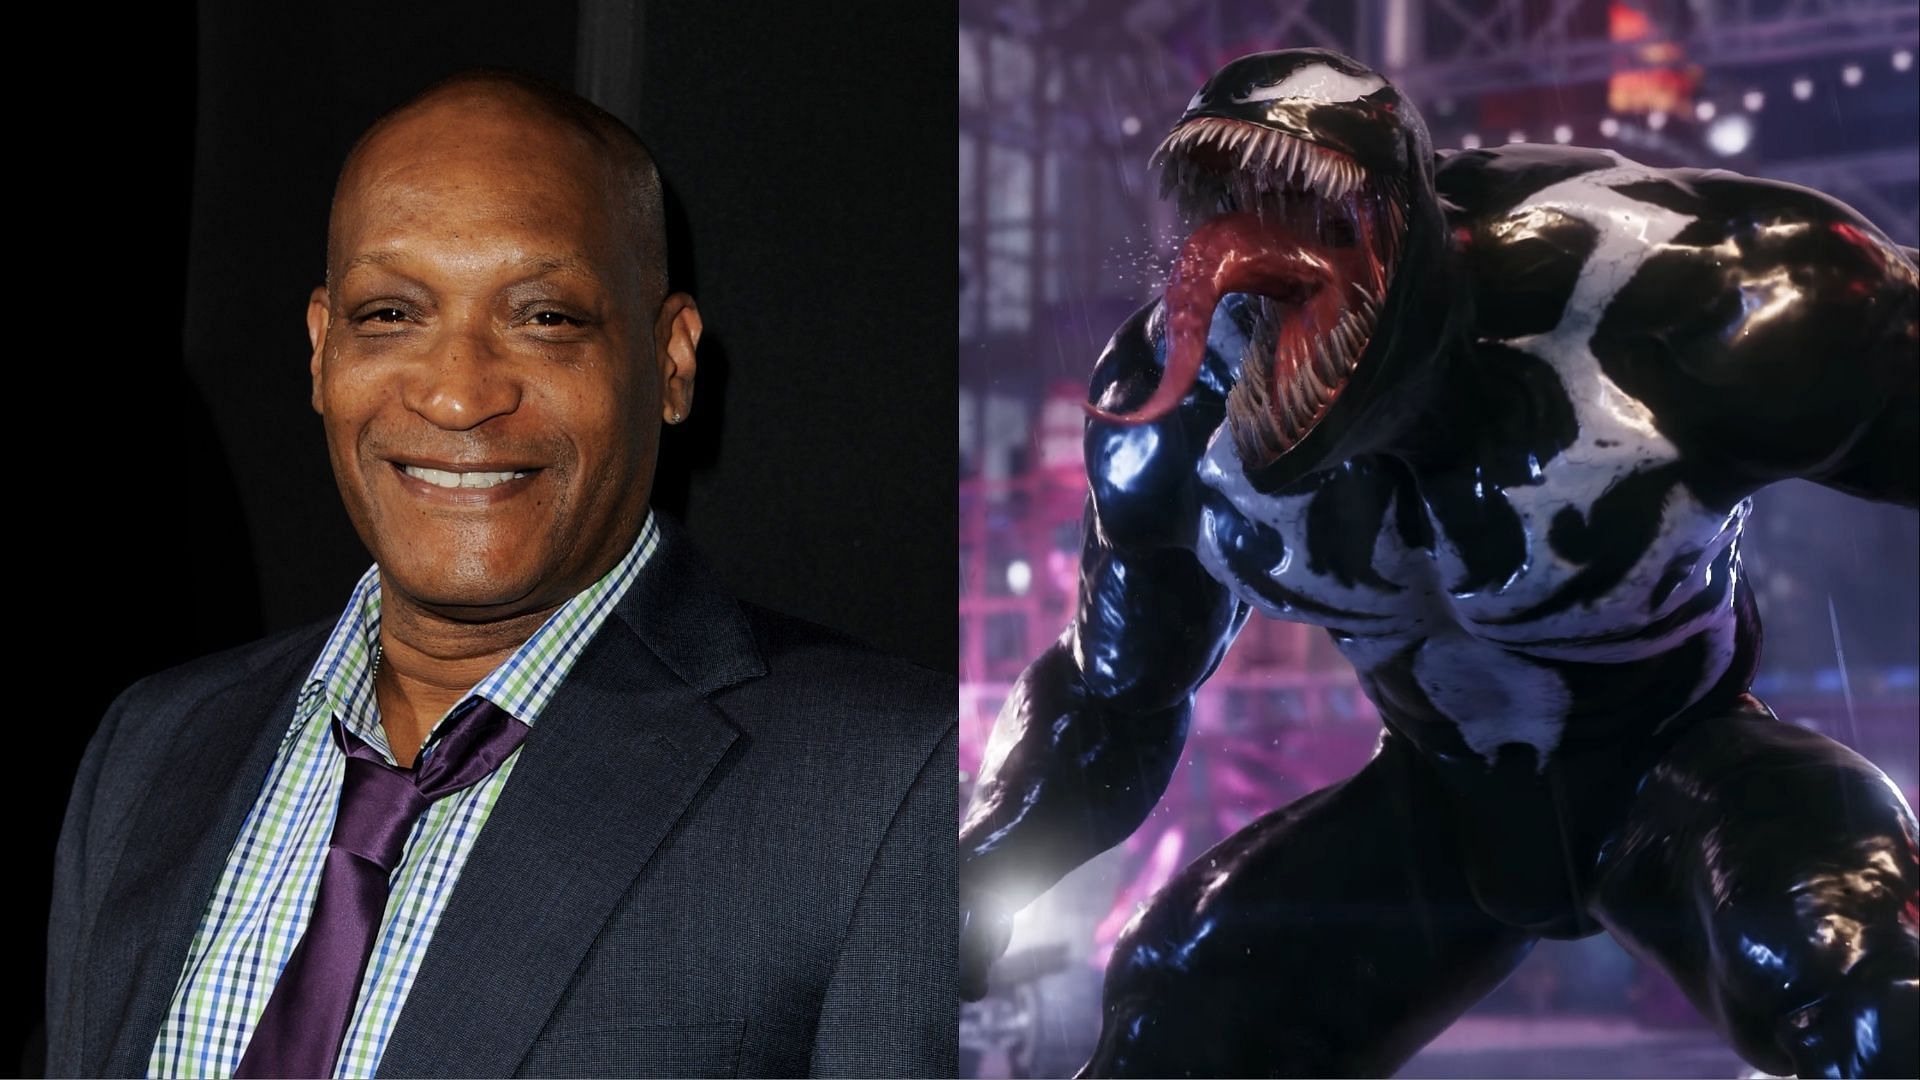 Who Are The Voice Actors In Marvel's Spider-Man 2 for the PS5? - Siliconera